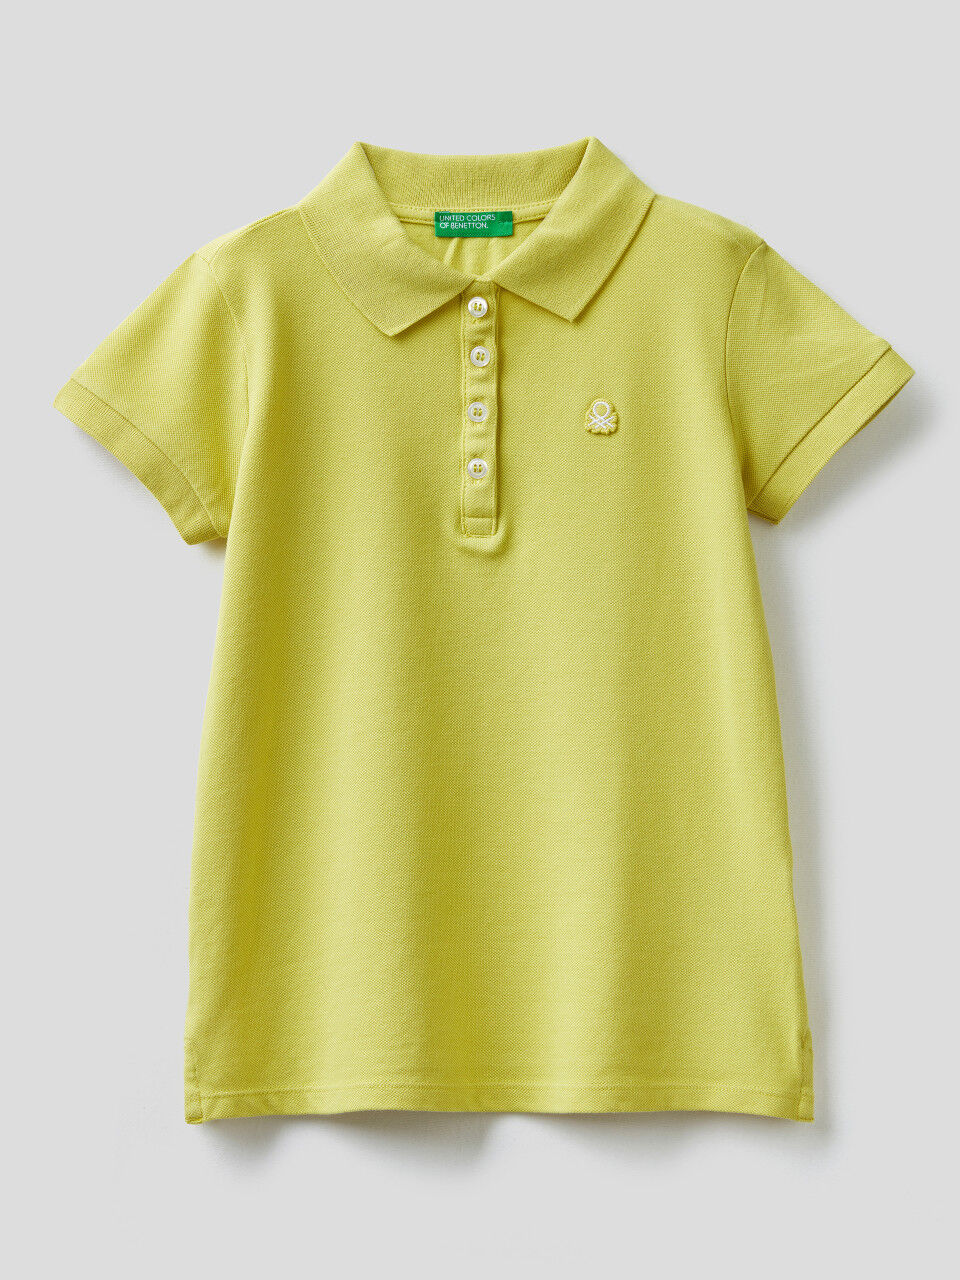 United Colors of Benetton Girl's Polo Shirt